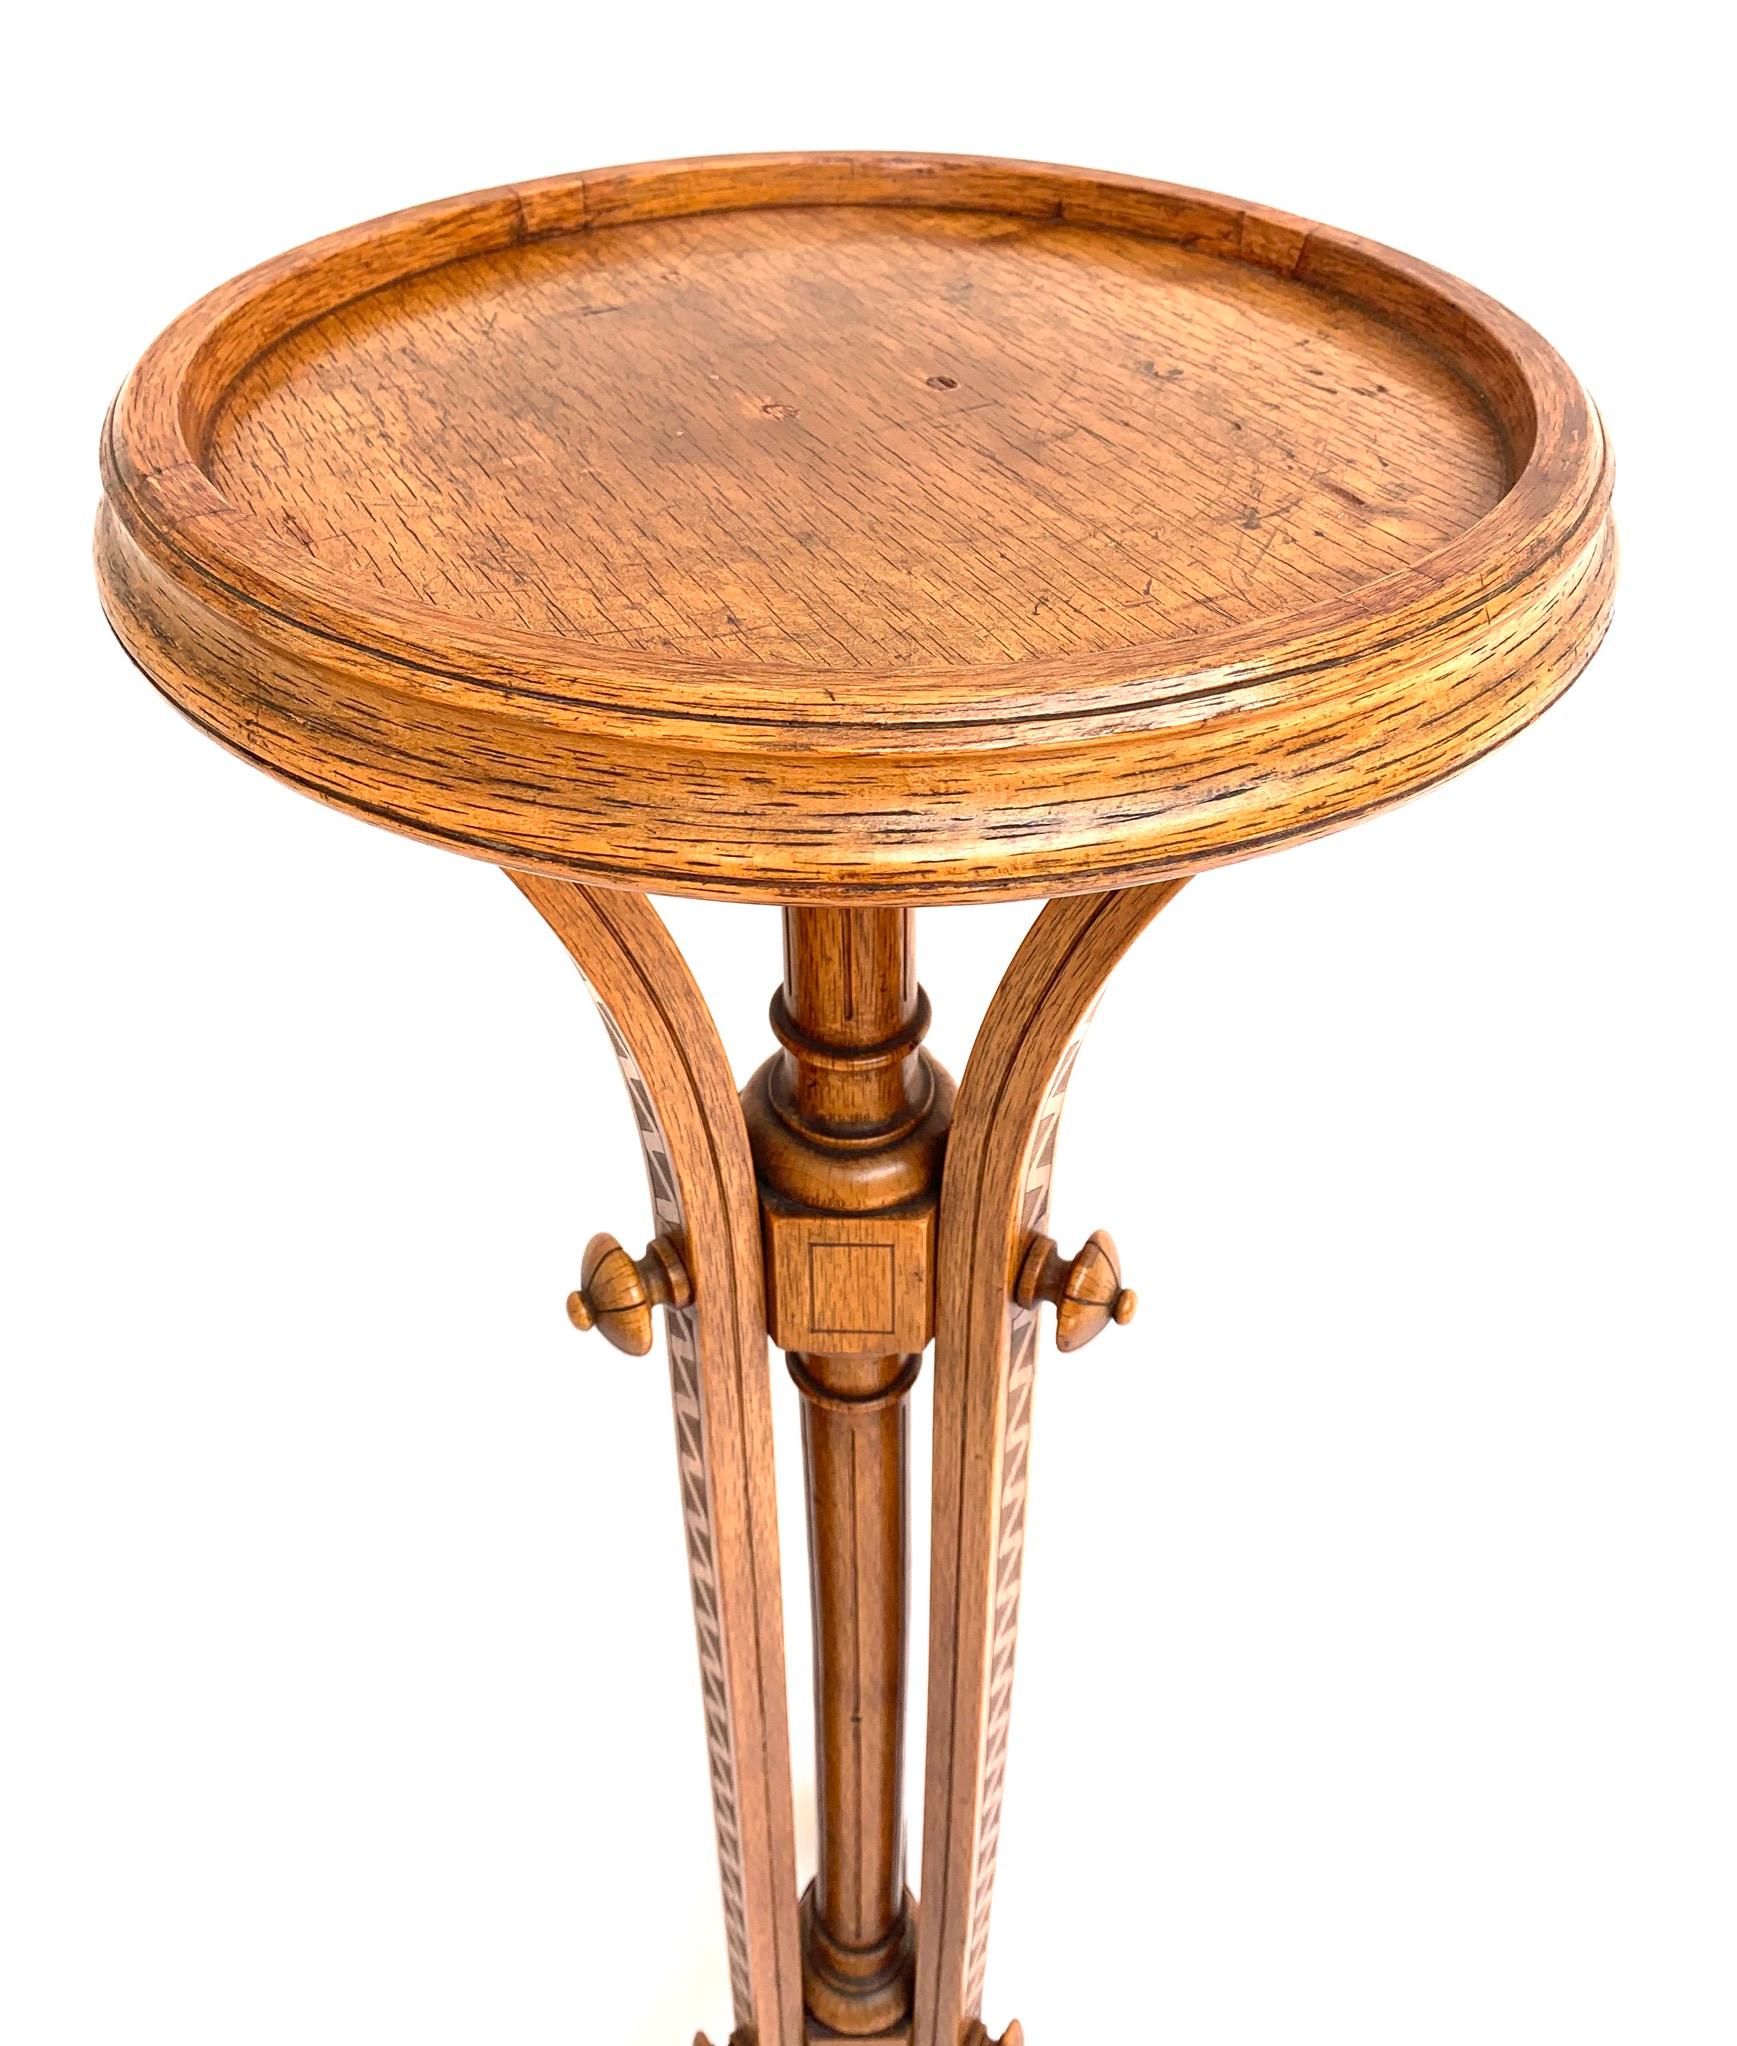 For the collectors of unique and extraordinary antiques, like Moser Koloman, Adolf Loos.

When it comes to handcrafted antique pedestal stands this particular piece could very well be the most handsome and stylish we ever had the pleasure of